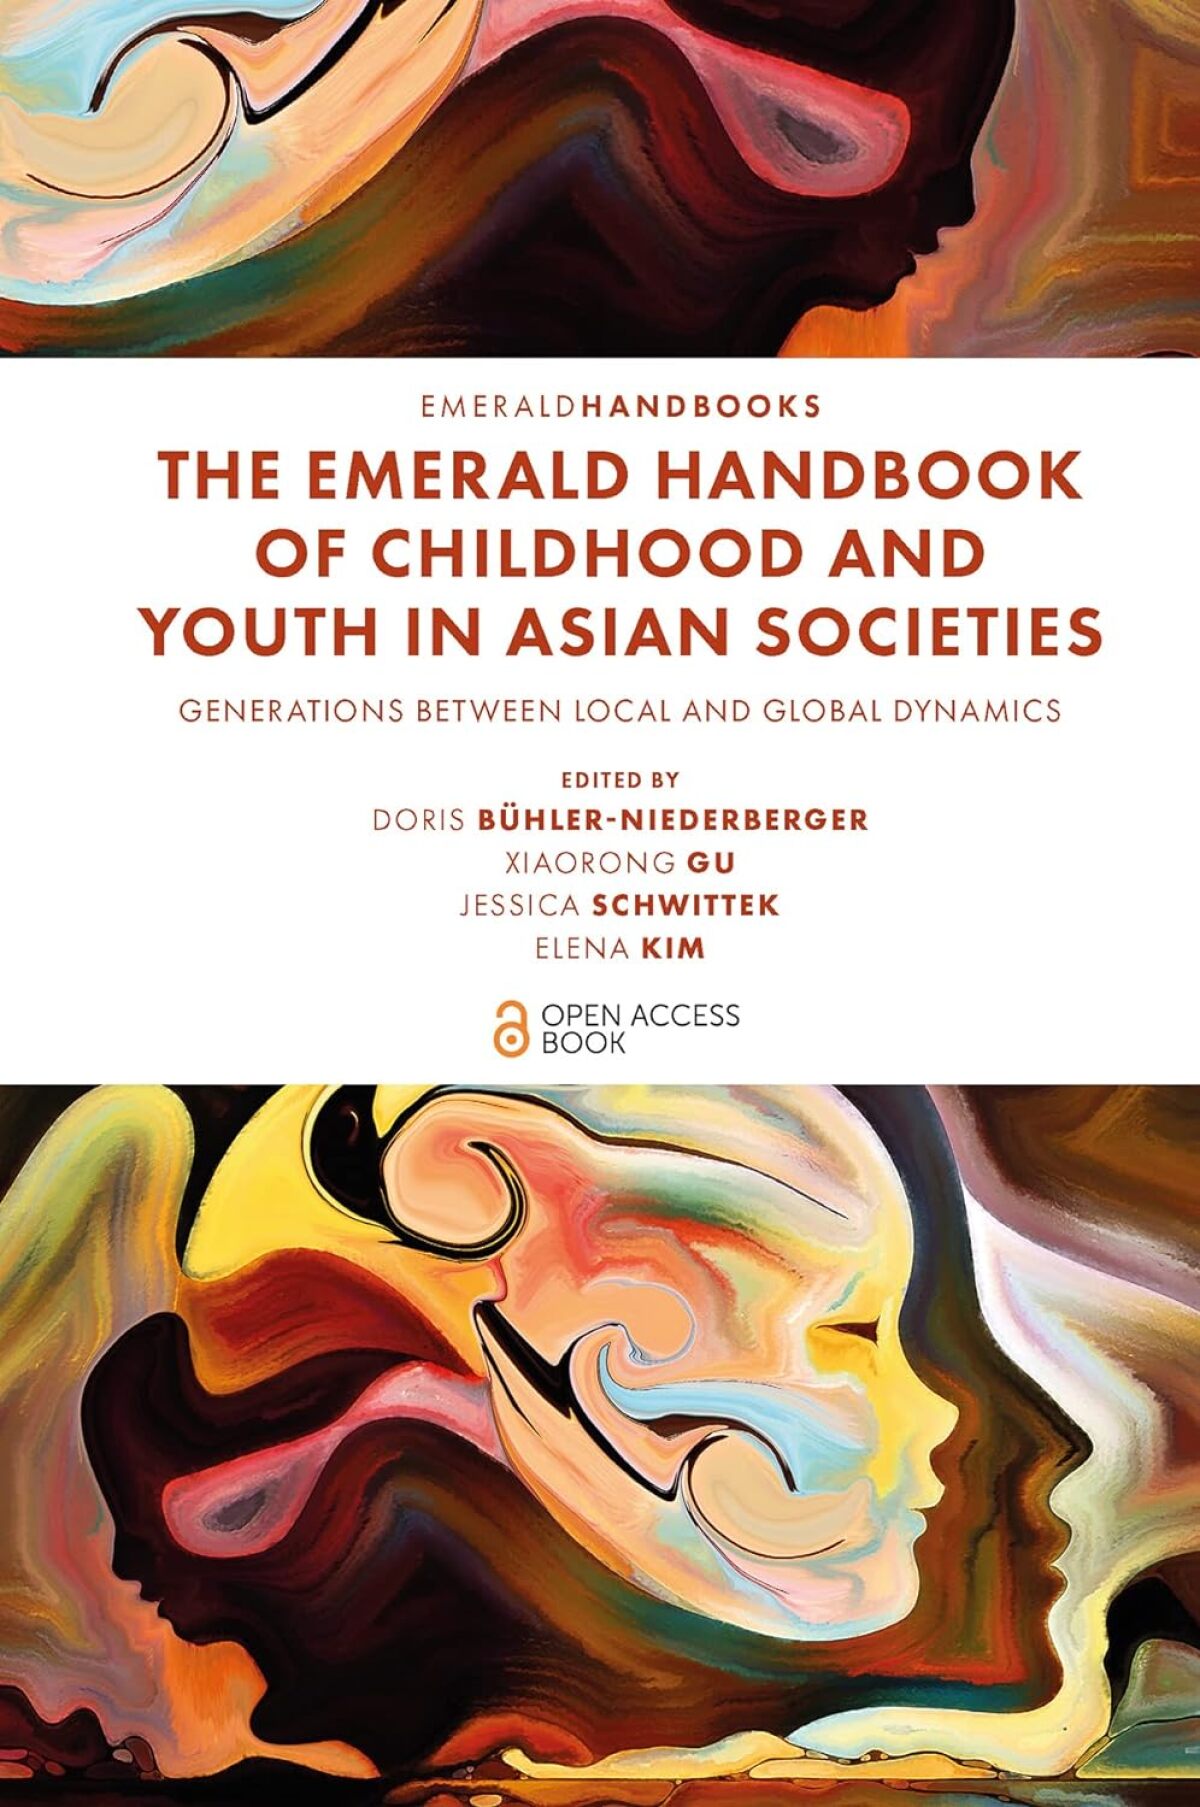 A photo of a book cover with the title "THE EMERALD HANDBOOK OF CHILDHOOD AND YOUTH IN ASIAN SOCIETIES: GENERATIONS BETWEEN LOCAL AND GLOBAL DYNAMICS," the text "EDITED BY DORIS BÜHLER-NIEDERBERGER, XIAORONG GU, JESSICA SCHWITTEK, ELENA KIM" and an abstract painting as the cover illustration.'